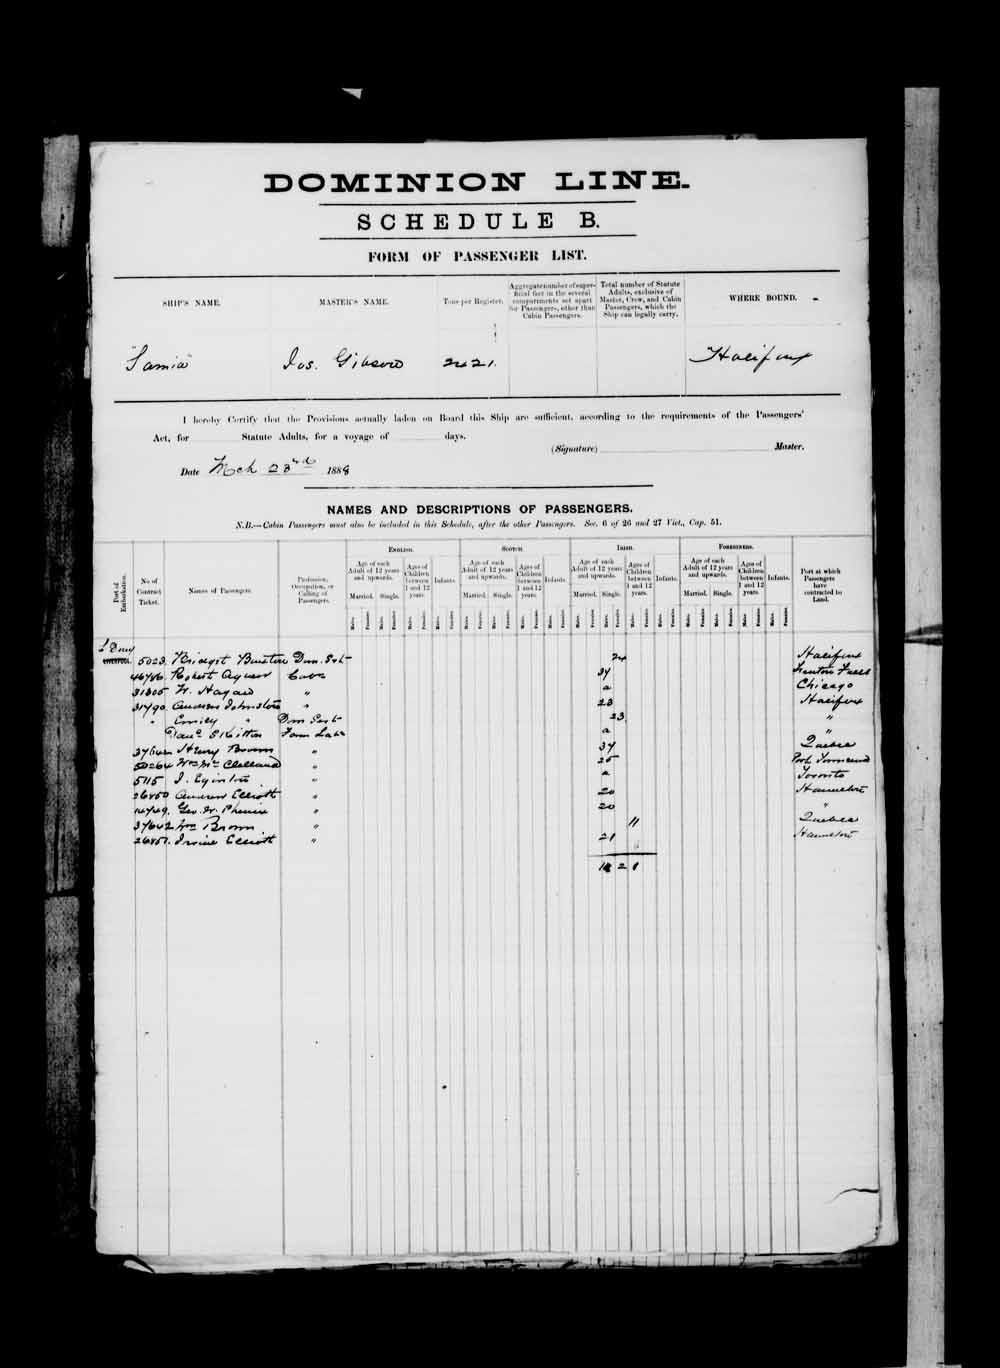 Digitized page of Passenger Lists for Image No.: e003674495